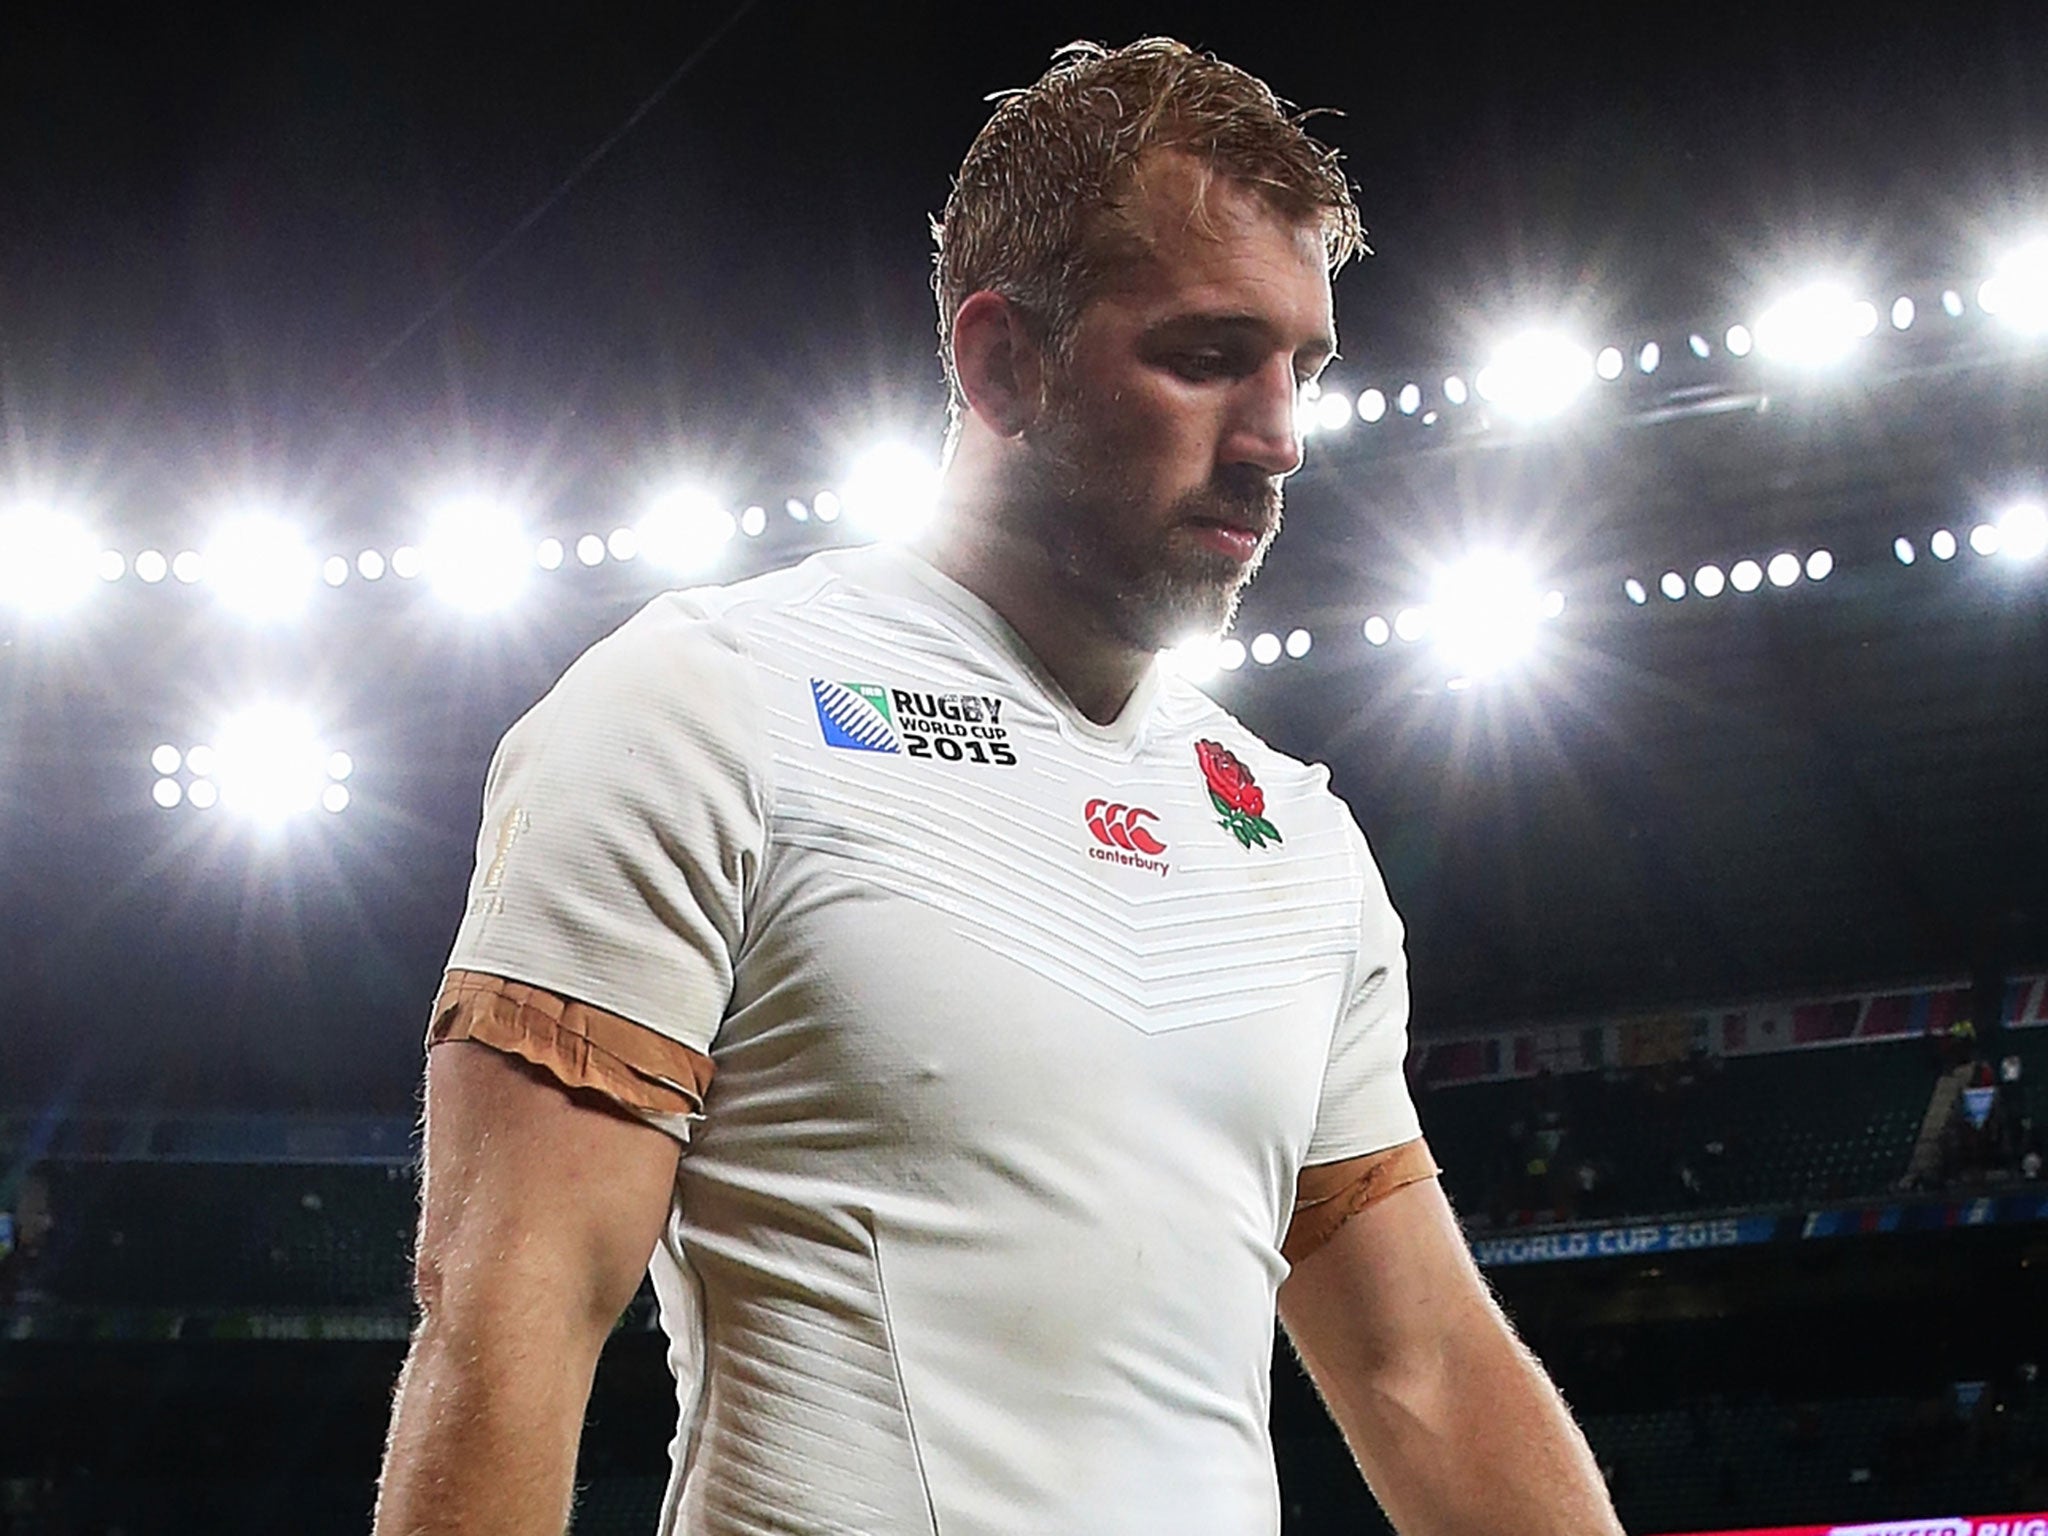 A dejected Robshaw walks off the Twickenham pitch after defeat by Wales in 2015 (Getty)